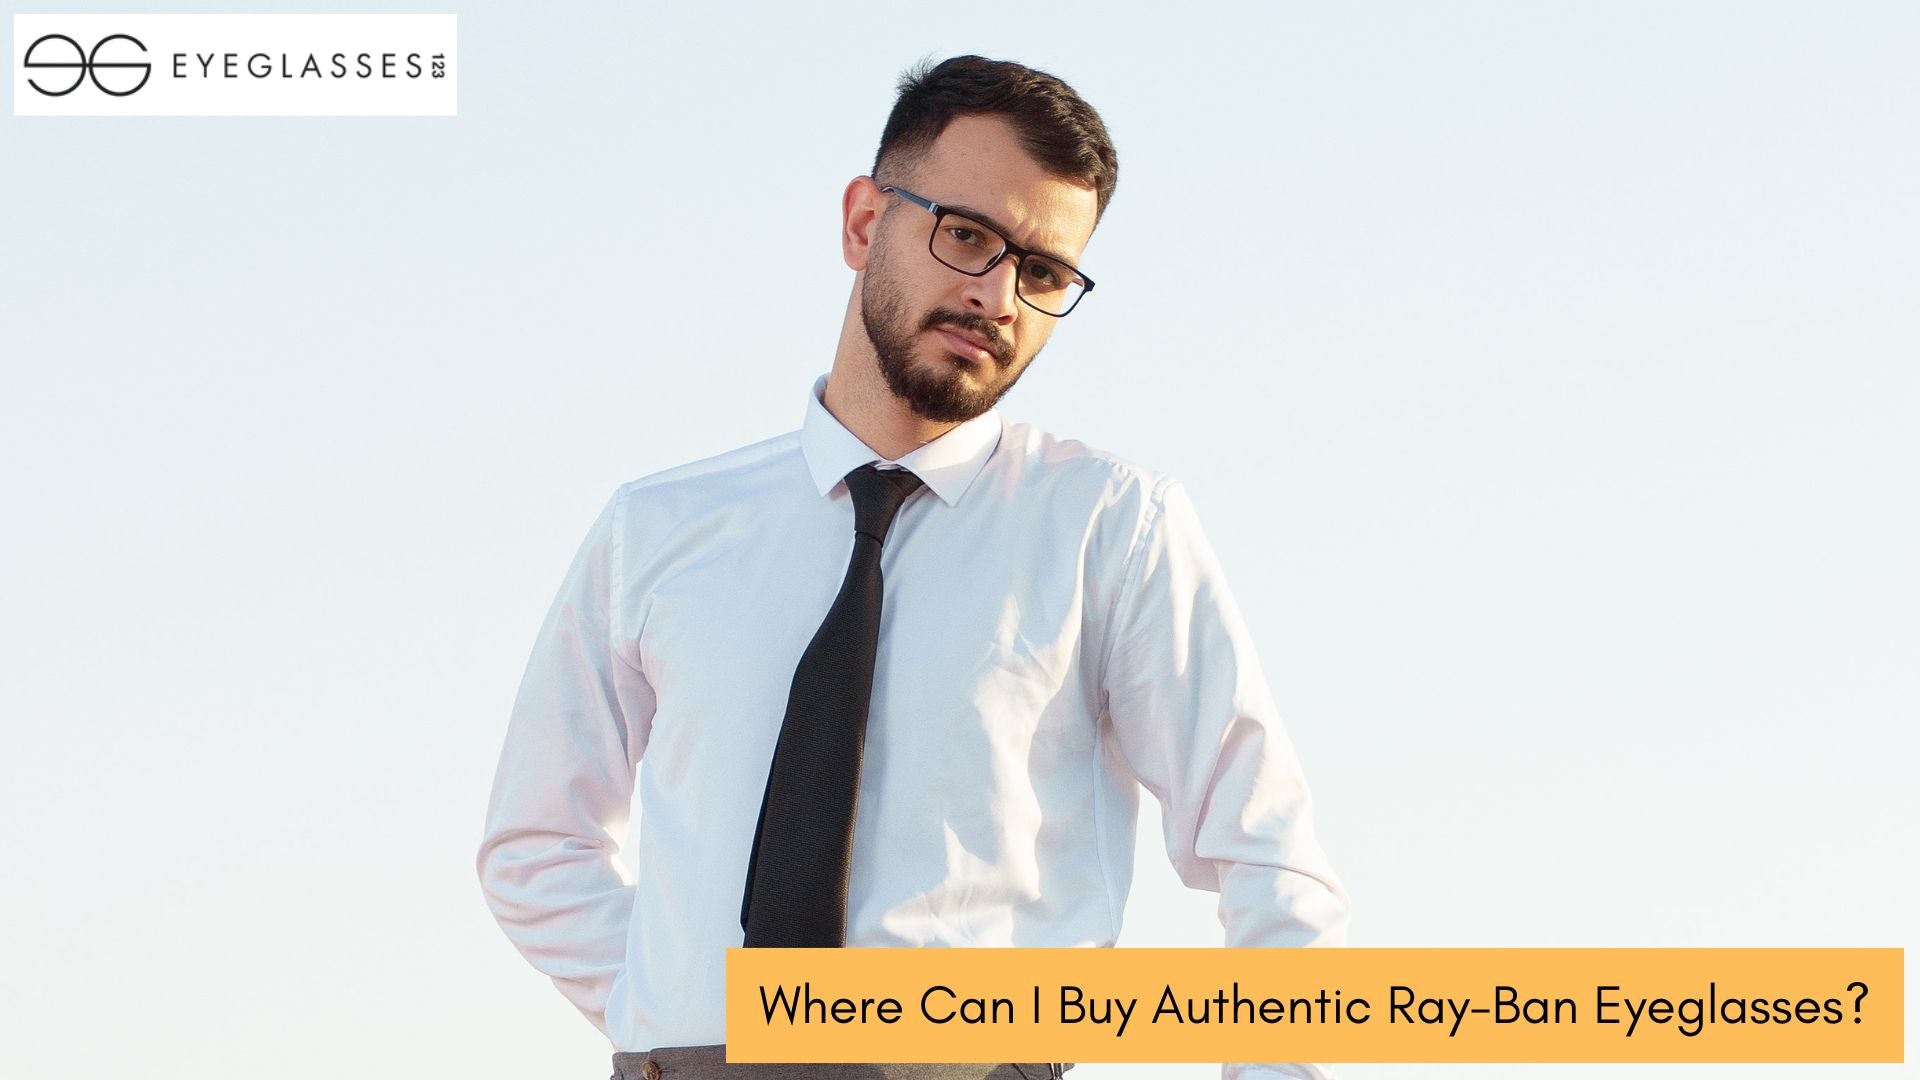 Where Can I Buy Authentic Ray-Ban Eyeglasses?